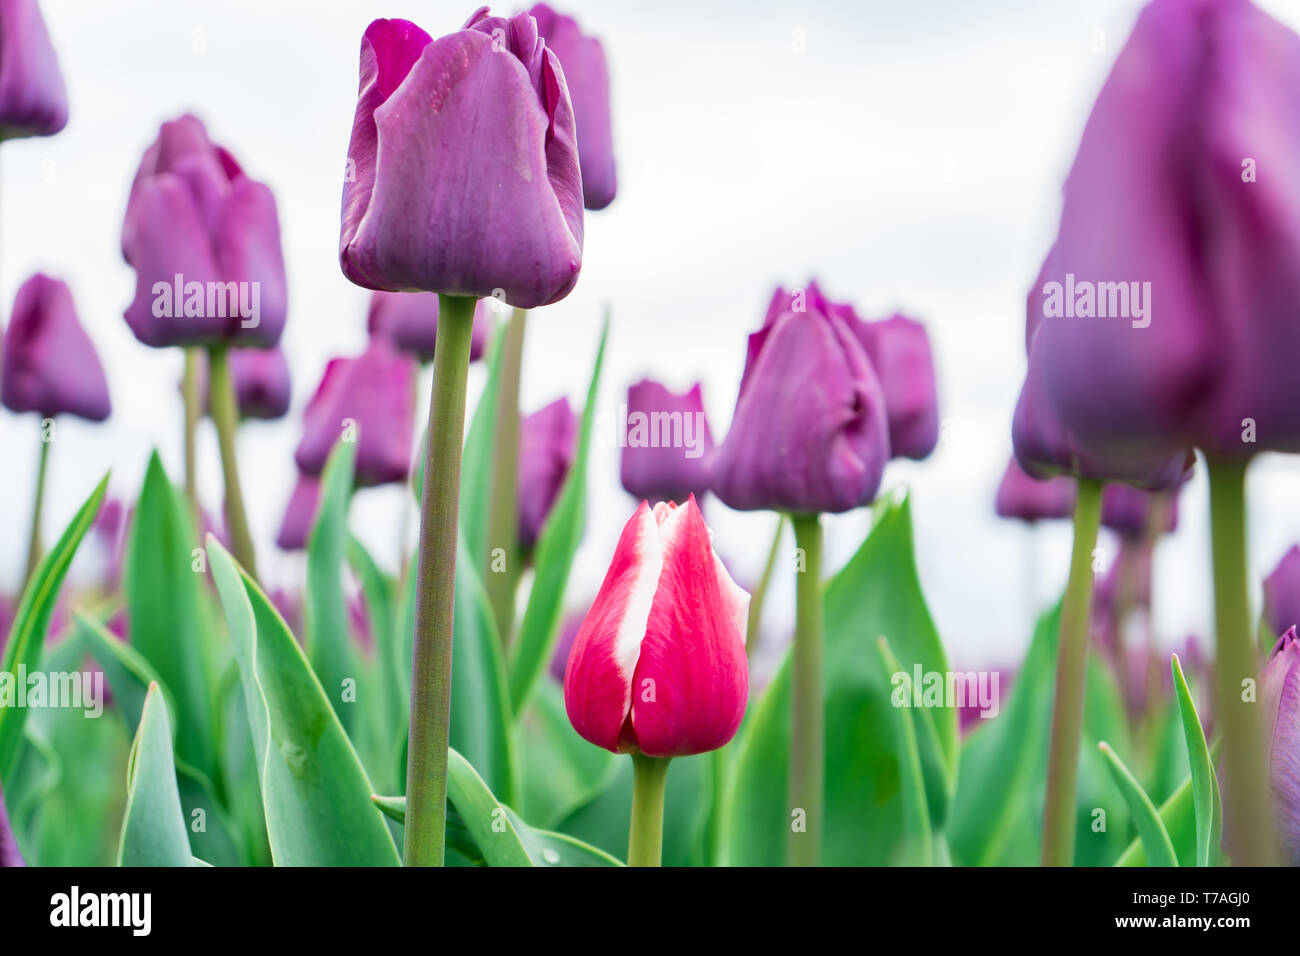 Low angle view of red and white french tulip growing among a field of purple triumph tulips. Close-up, high resolution photo of tulips. Stock Photo